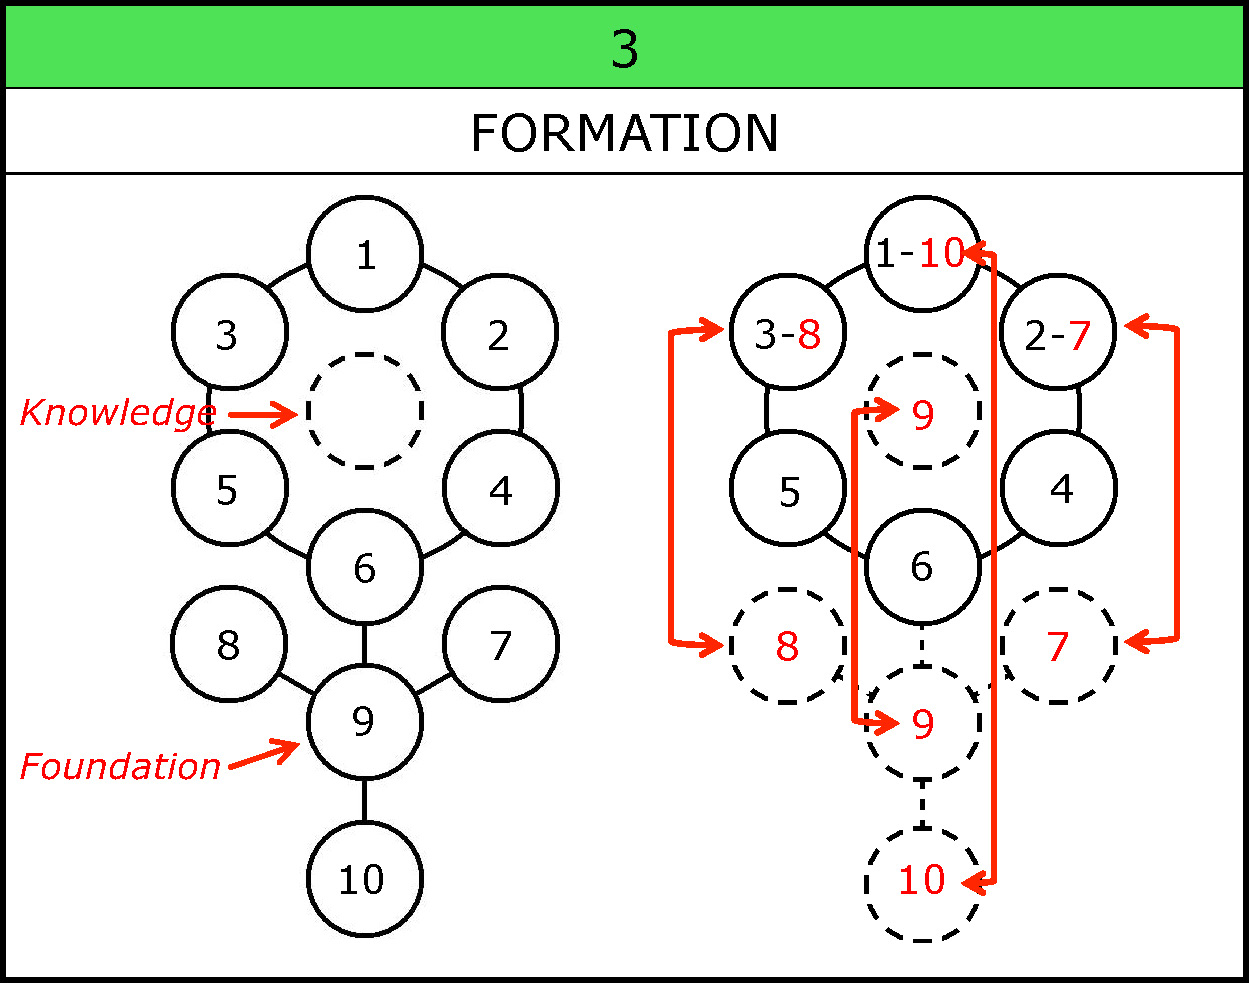 Sequence-3Formation-Foundation Knowledge